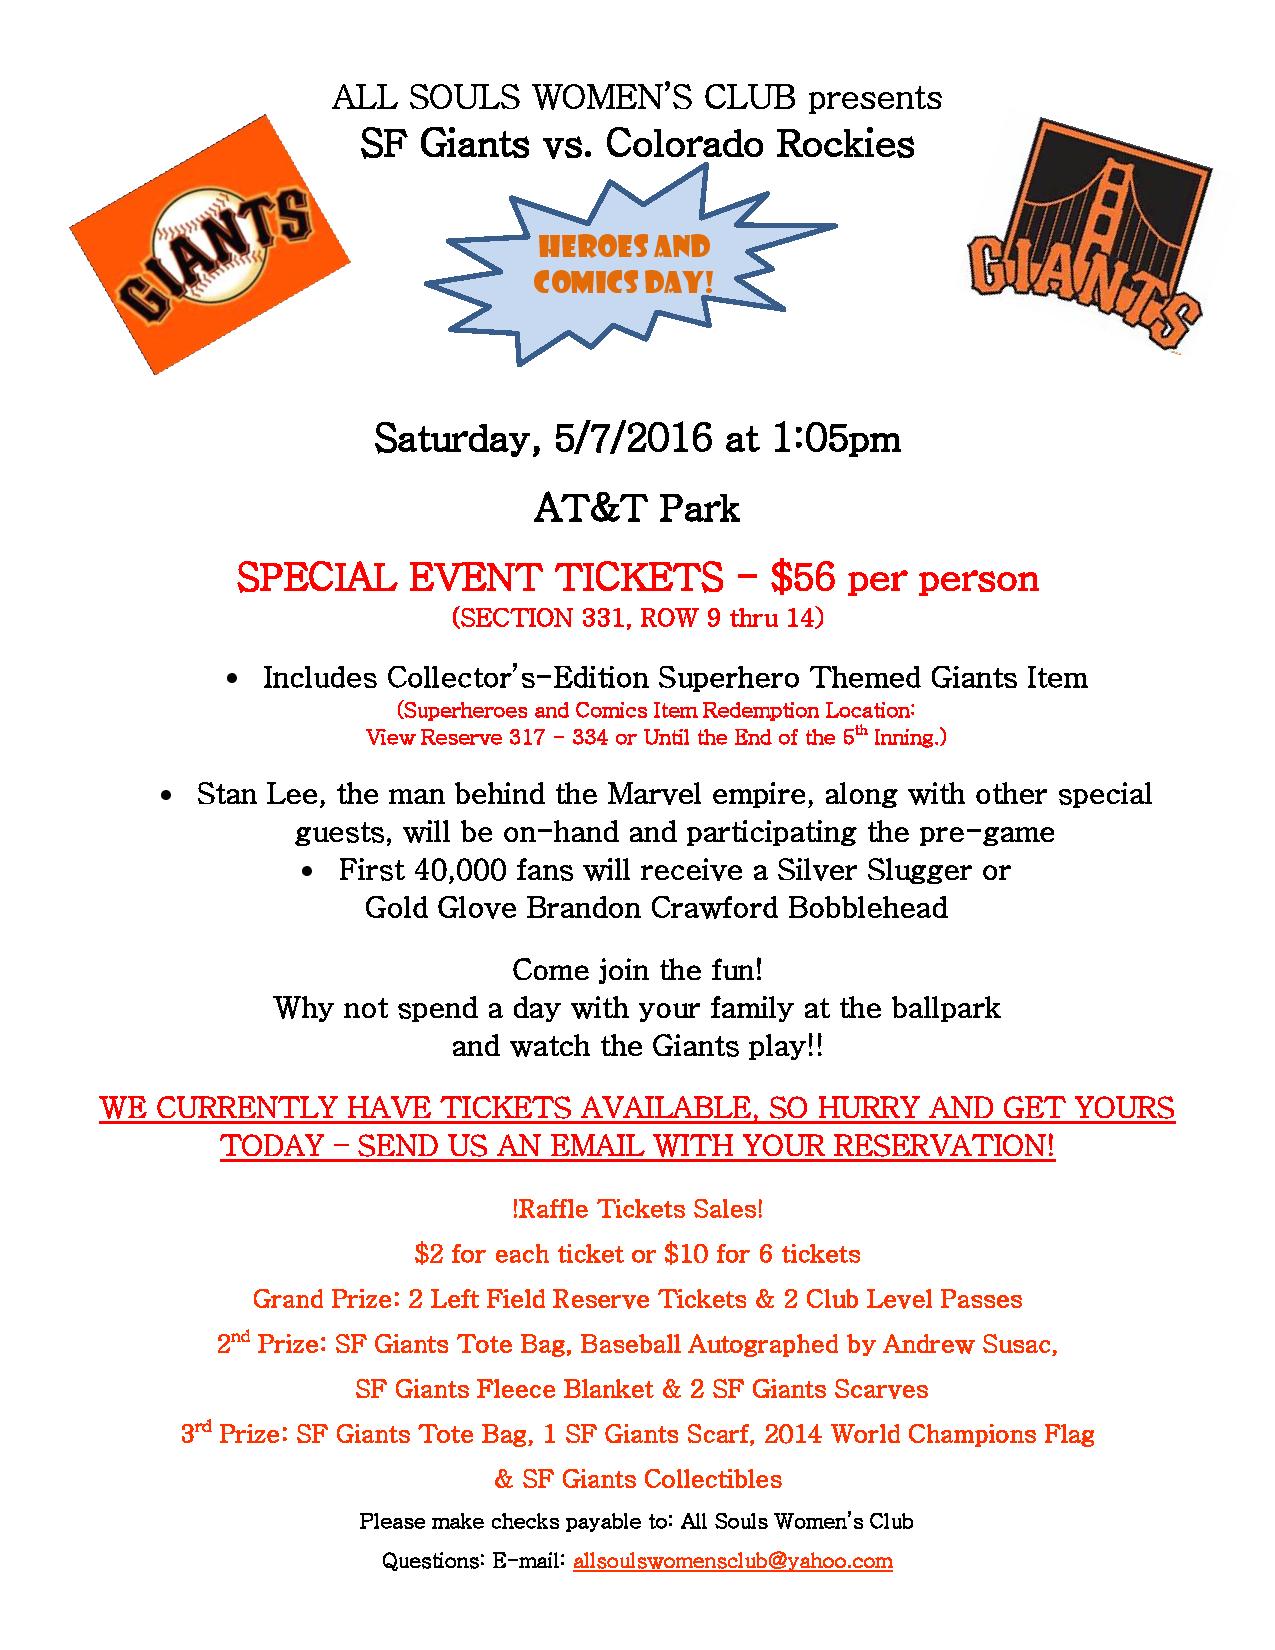 2016 SF Giants Fundraiser Flyer ASWC_03.3.16-page-001